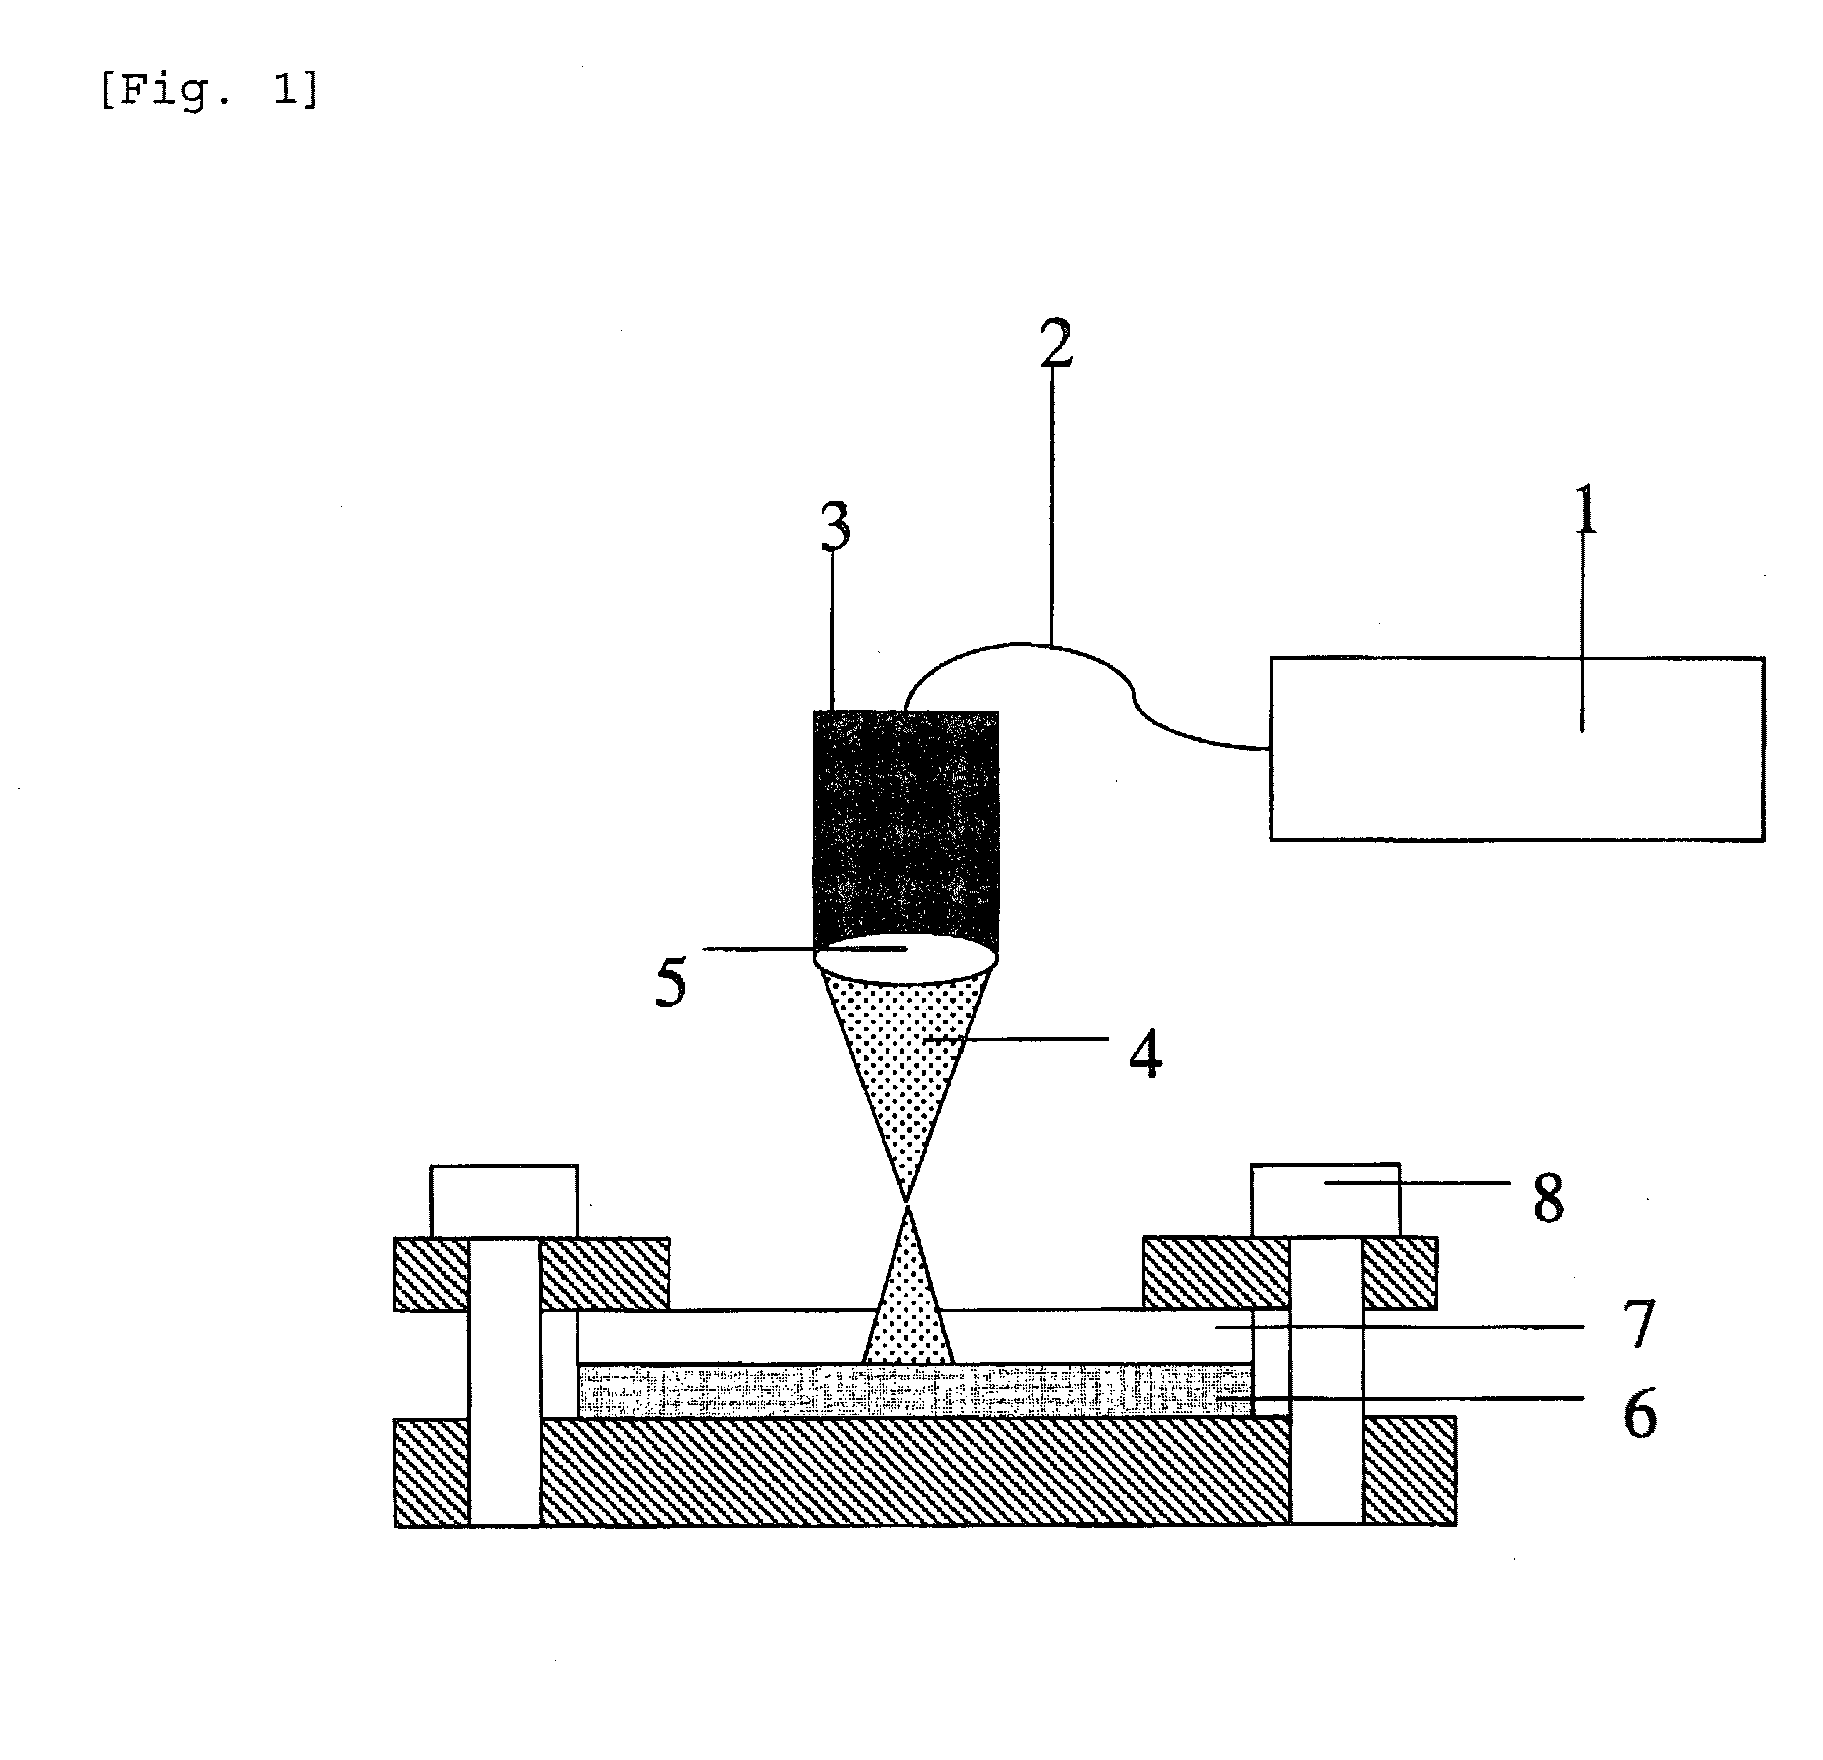 Method for metal-resin joining and a metal-resin composite, a method for glass-resin joining and a glass-resin composite, and a method for ceramic-resin joining and a ceramic-resin composite